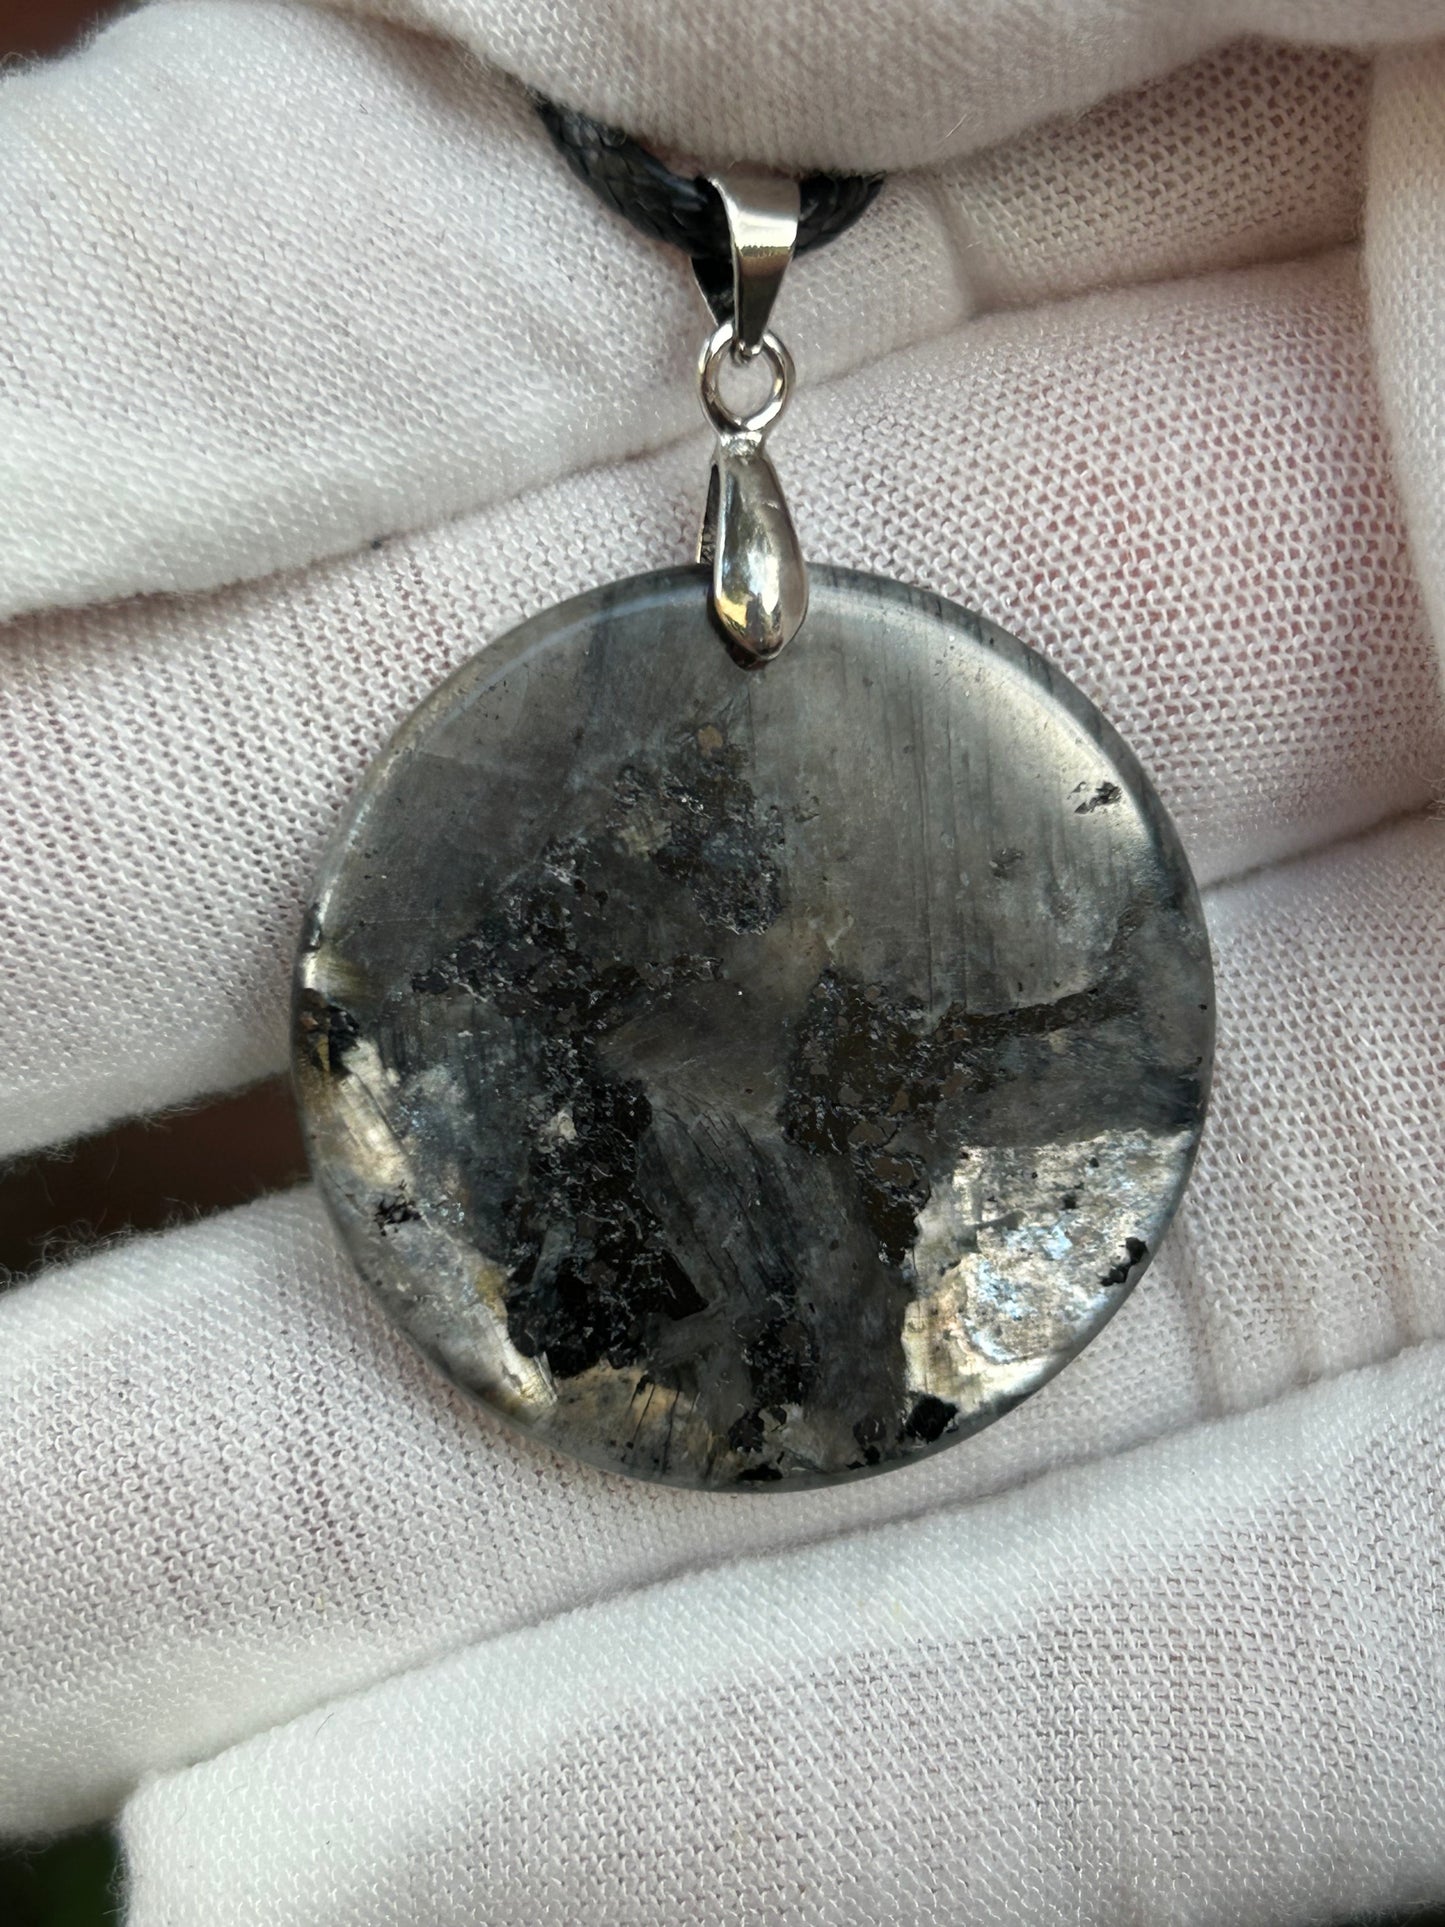 Round Polished Spectrolite pendant silver black gray tones with silver pendant attachment and black cord necklace